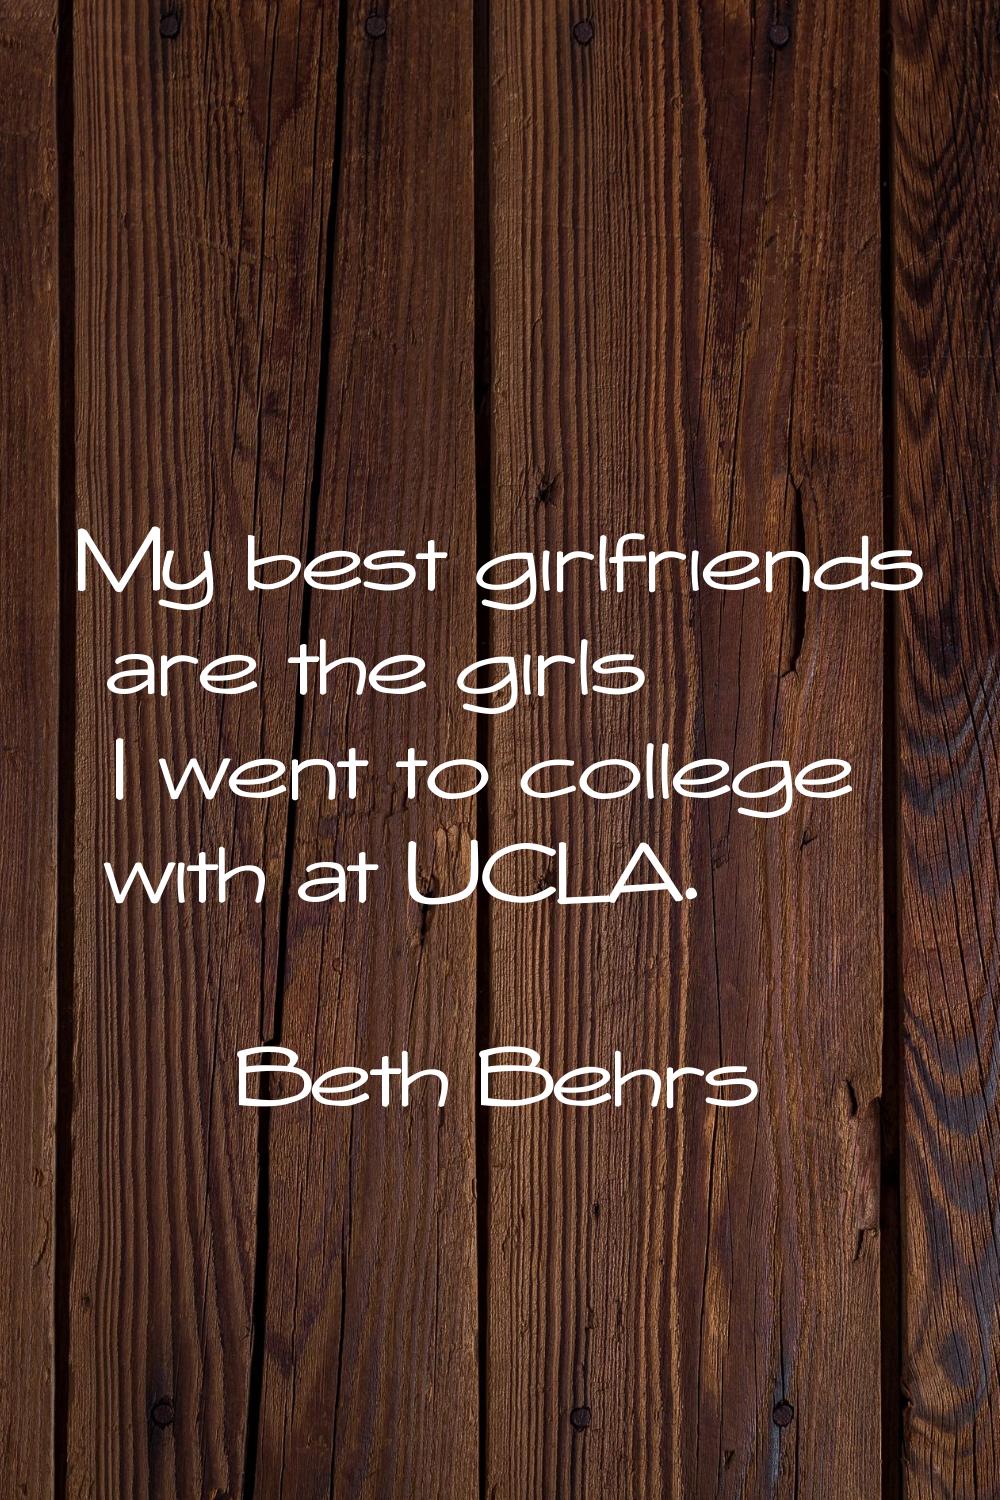 My best girlfriends are the girls I went to college with at UCLA.